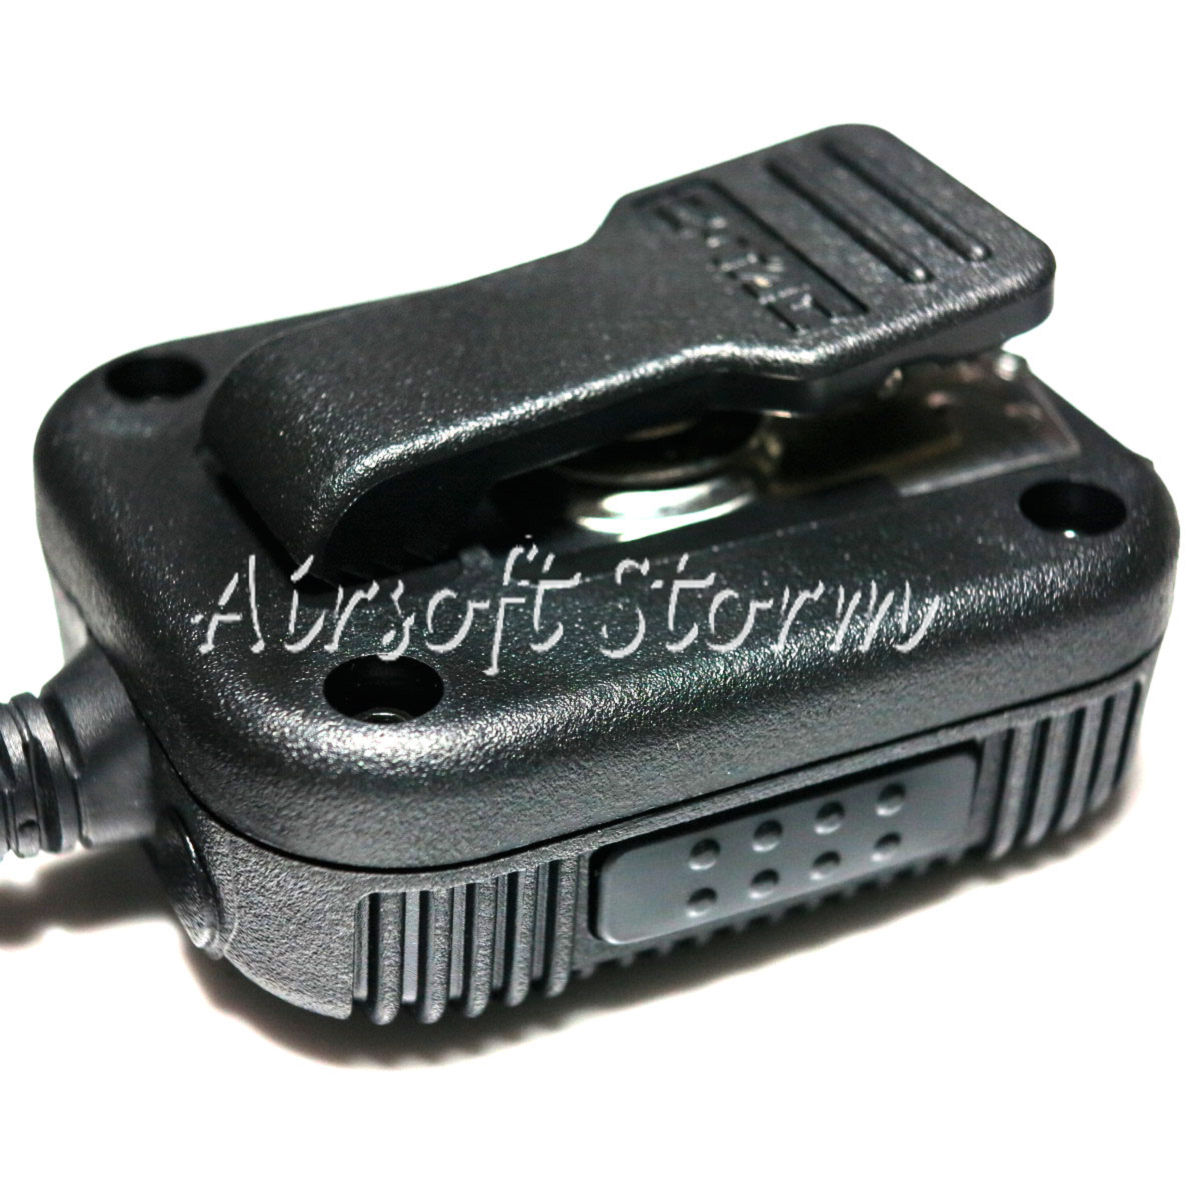 Airsoft Gear SWAT Z-Tactical USMC Intercom with mic for ICOM 2 Pin Radio - Click Image to Close